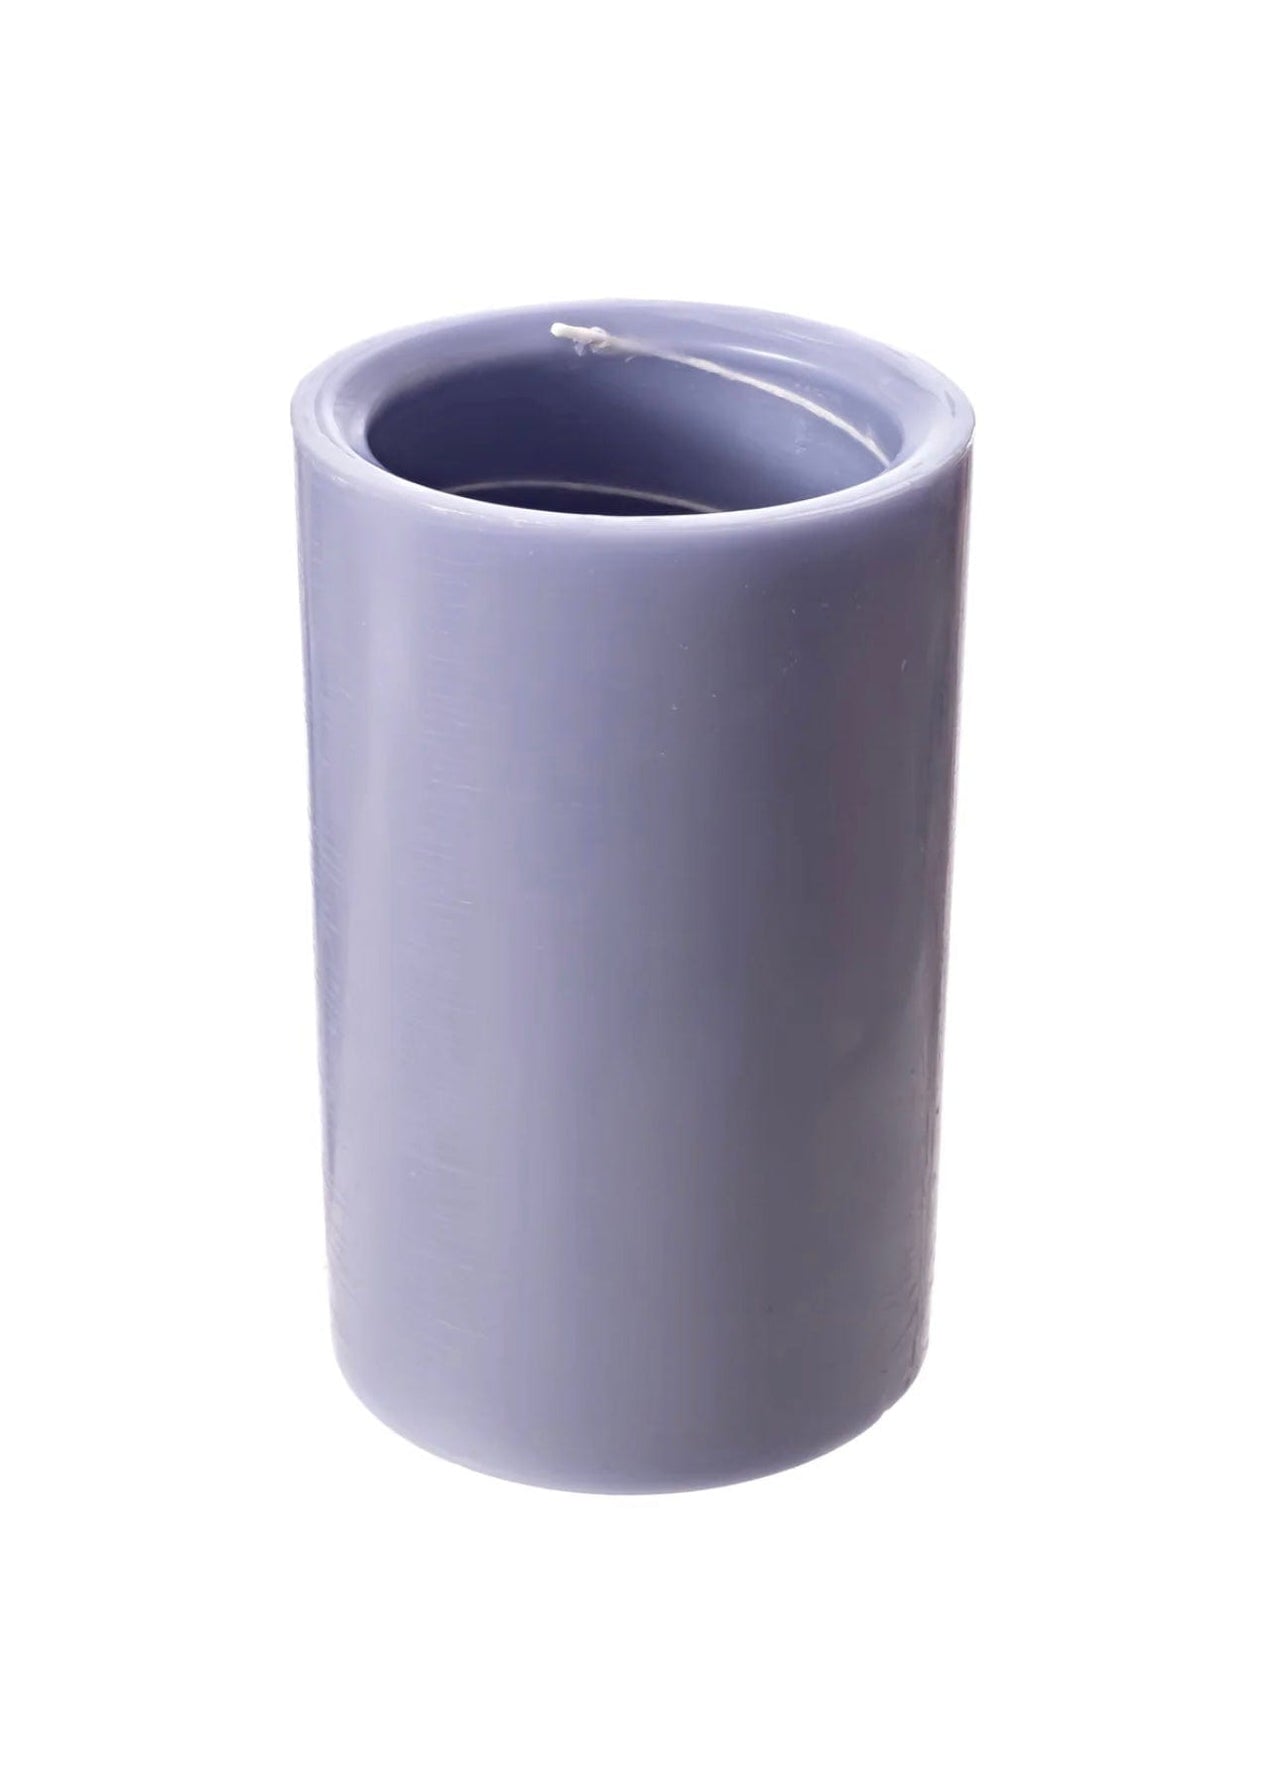 Spiral Light Candles burn AROUND the Candle's Edge! Spiral Light Candle Large 4"w x 6"h / European Lilac